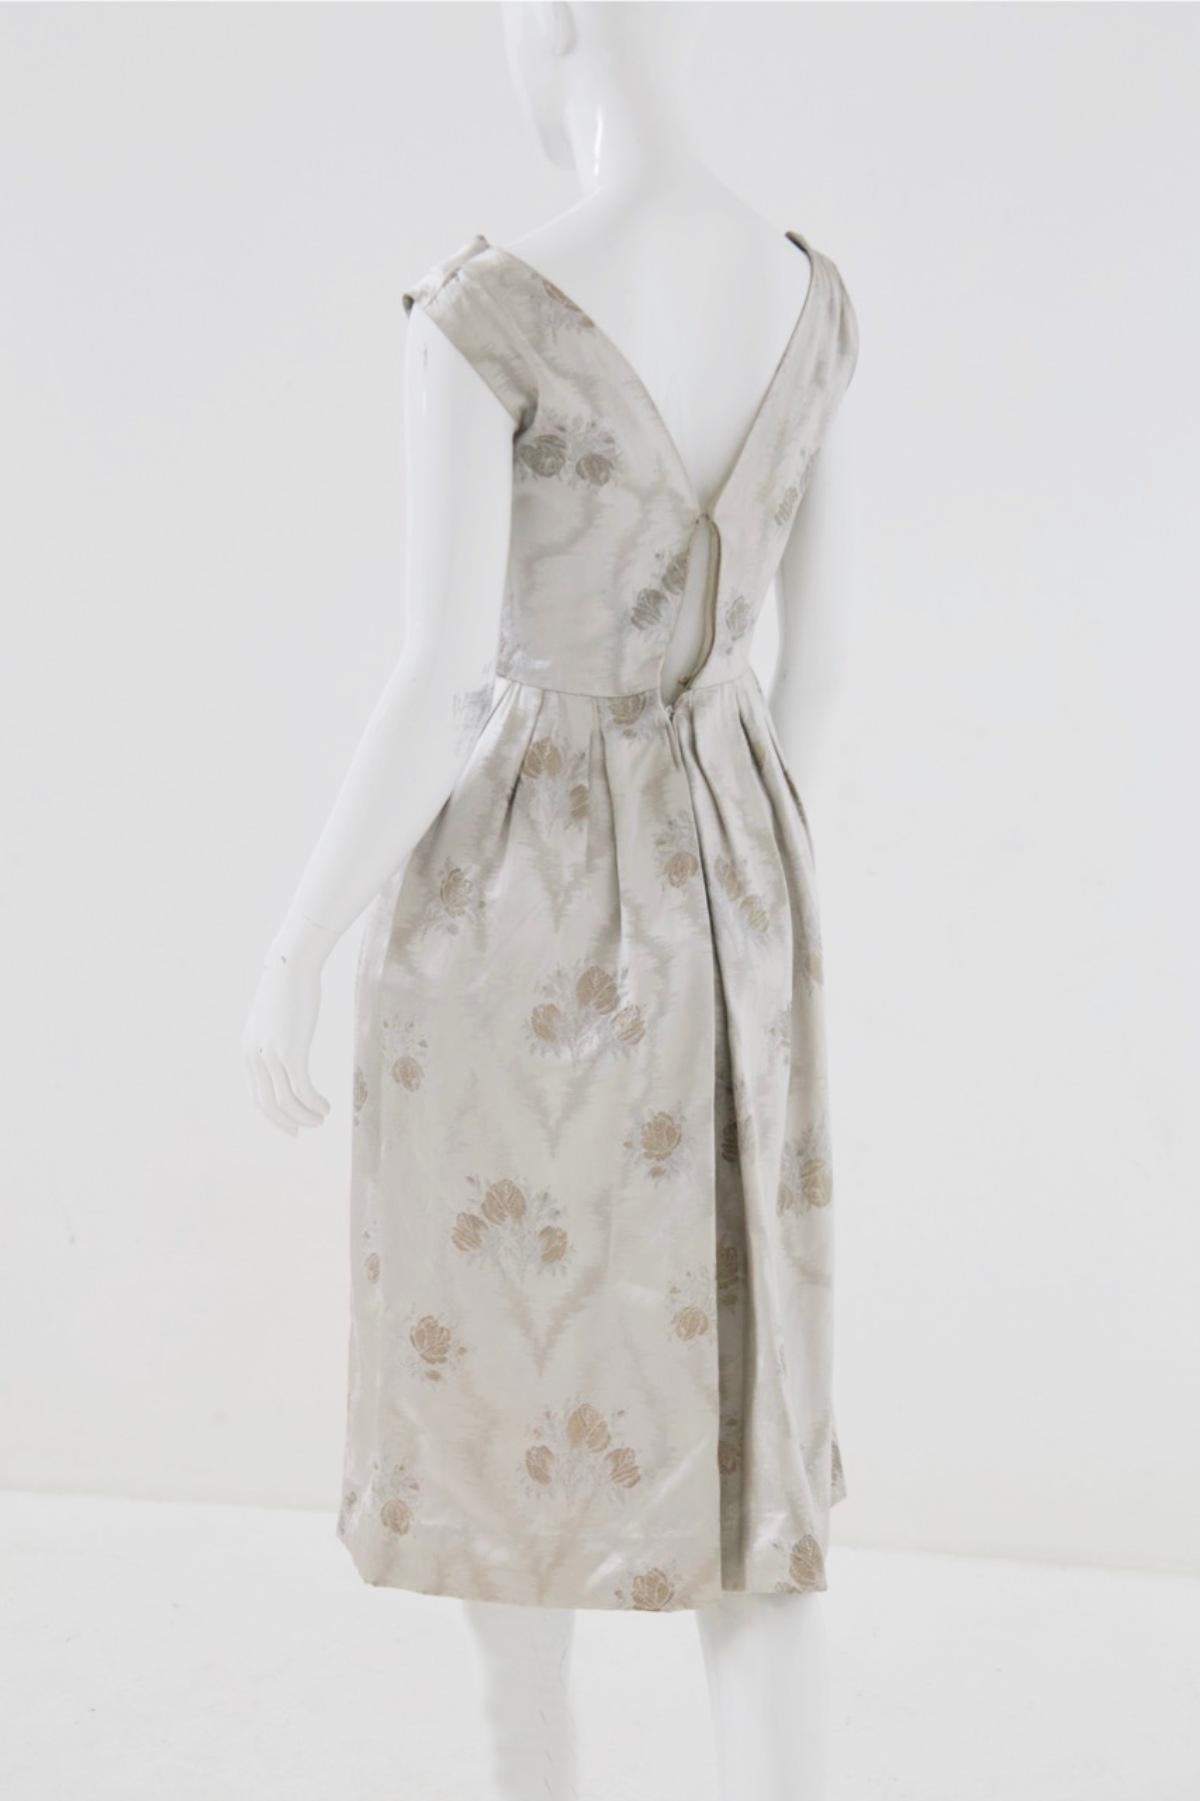 Garish Vintage Tailored Dress in Pearl Gray Silk Satin For Sale 4